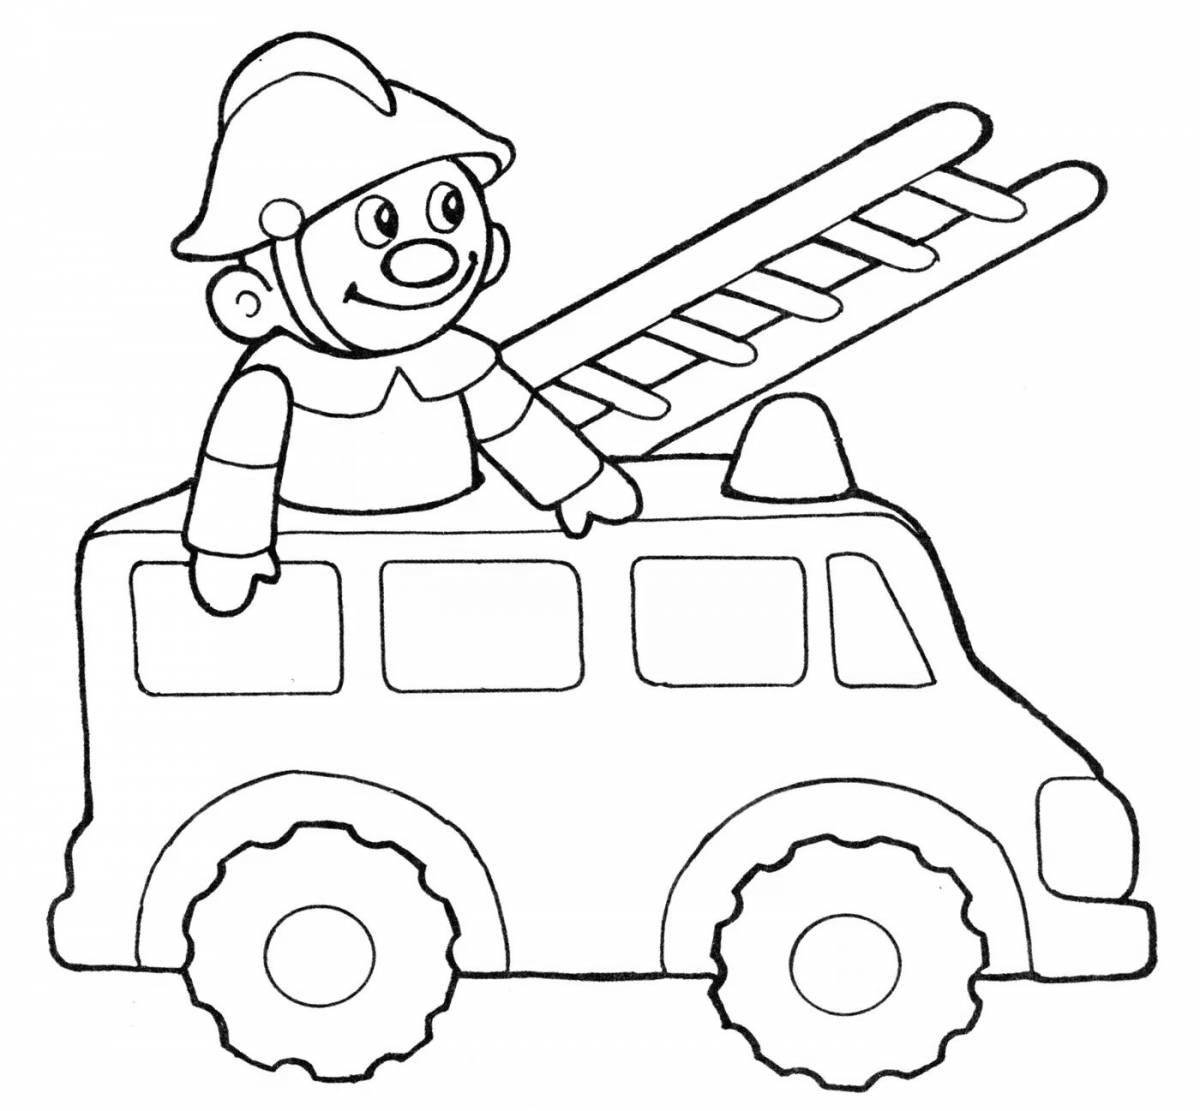 A lovely simple toy car coloring book